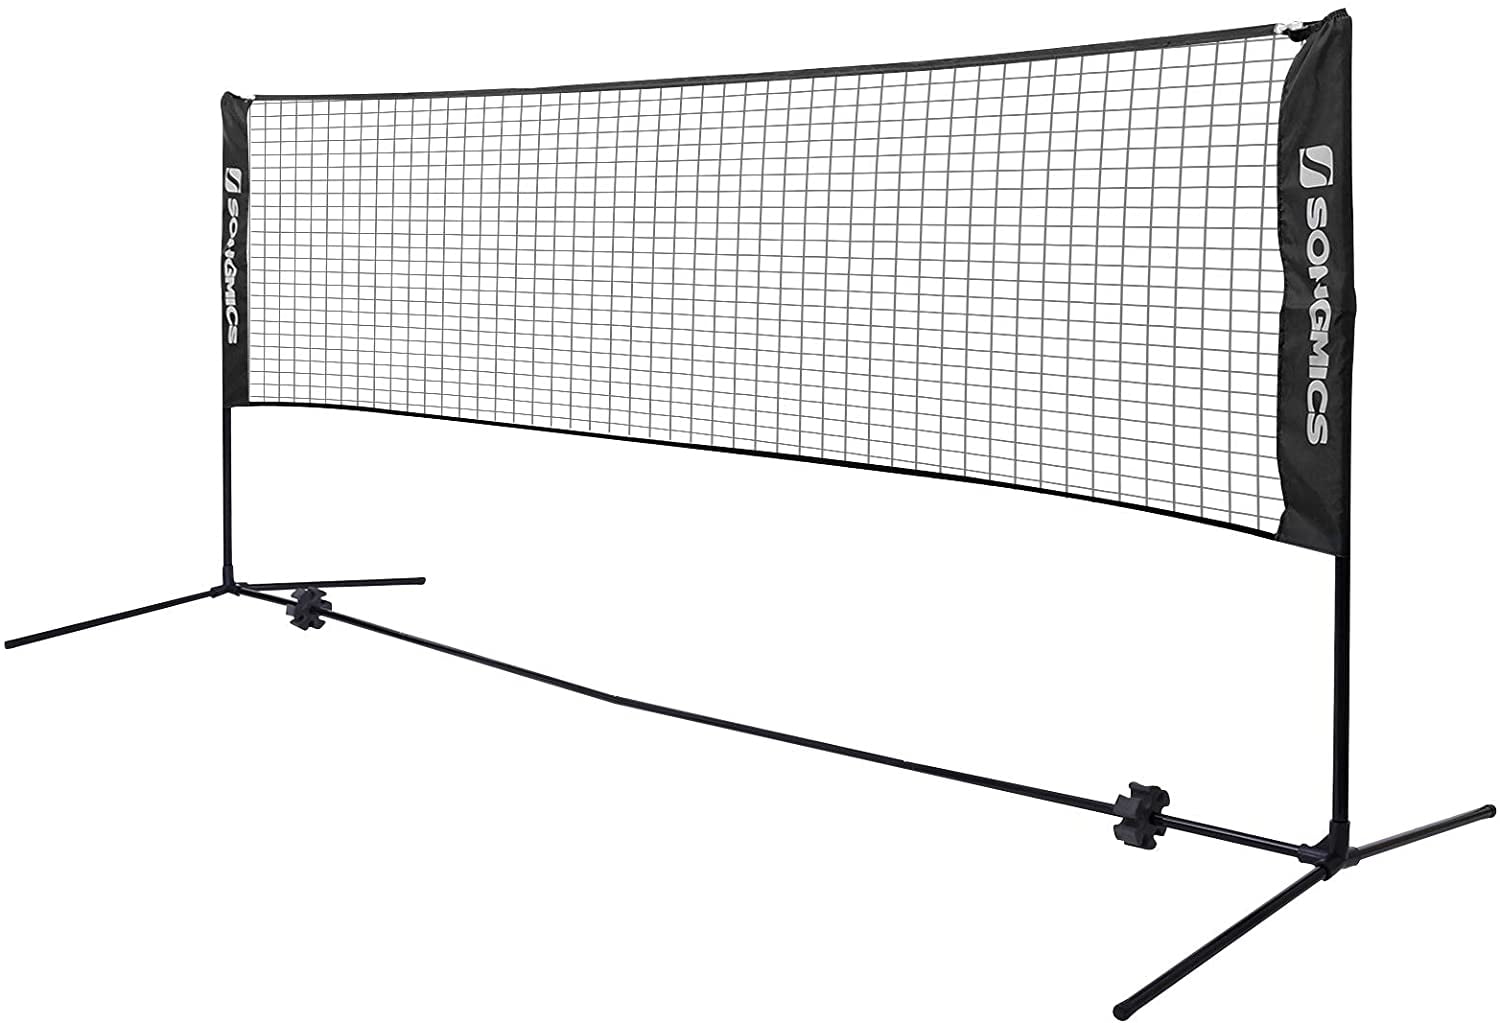 Driveway Kids Volleyball cuckoo-X Portable standard Badminton Net Set for Tennis Easy Setup Sports Net with Poles for Indoor or Outdoor Court Beach Pickleball 